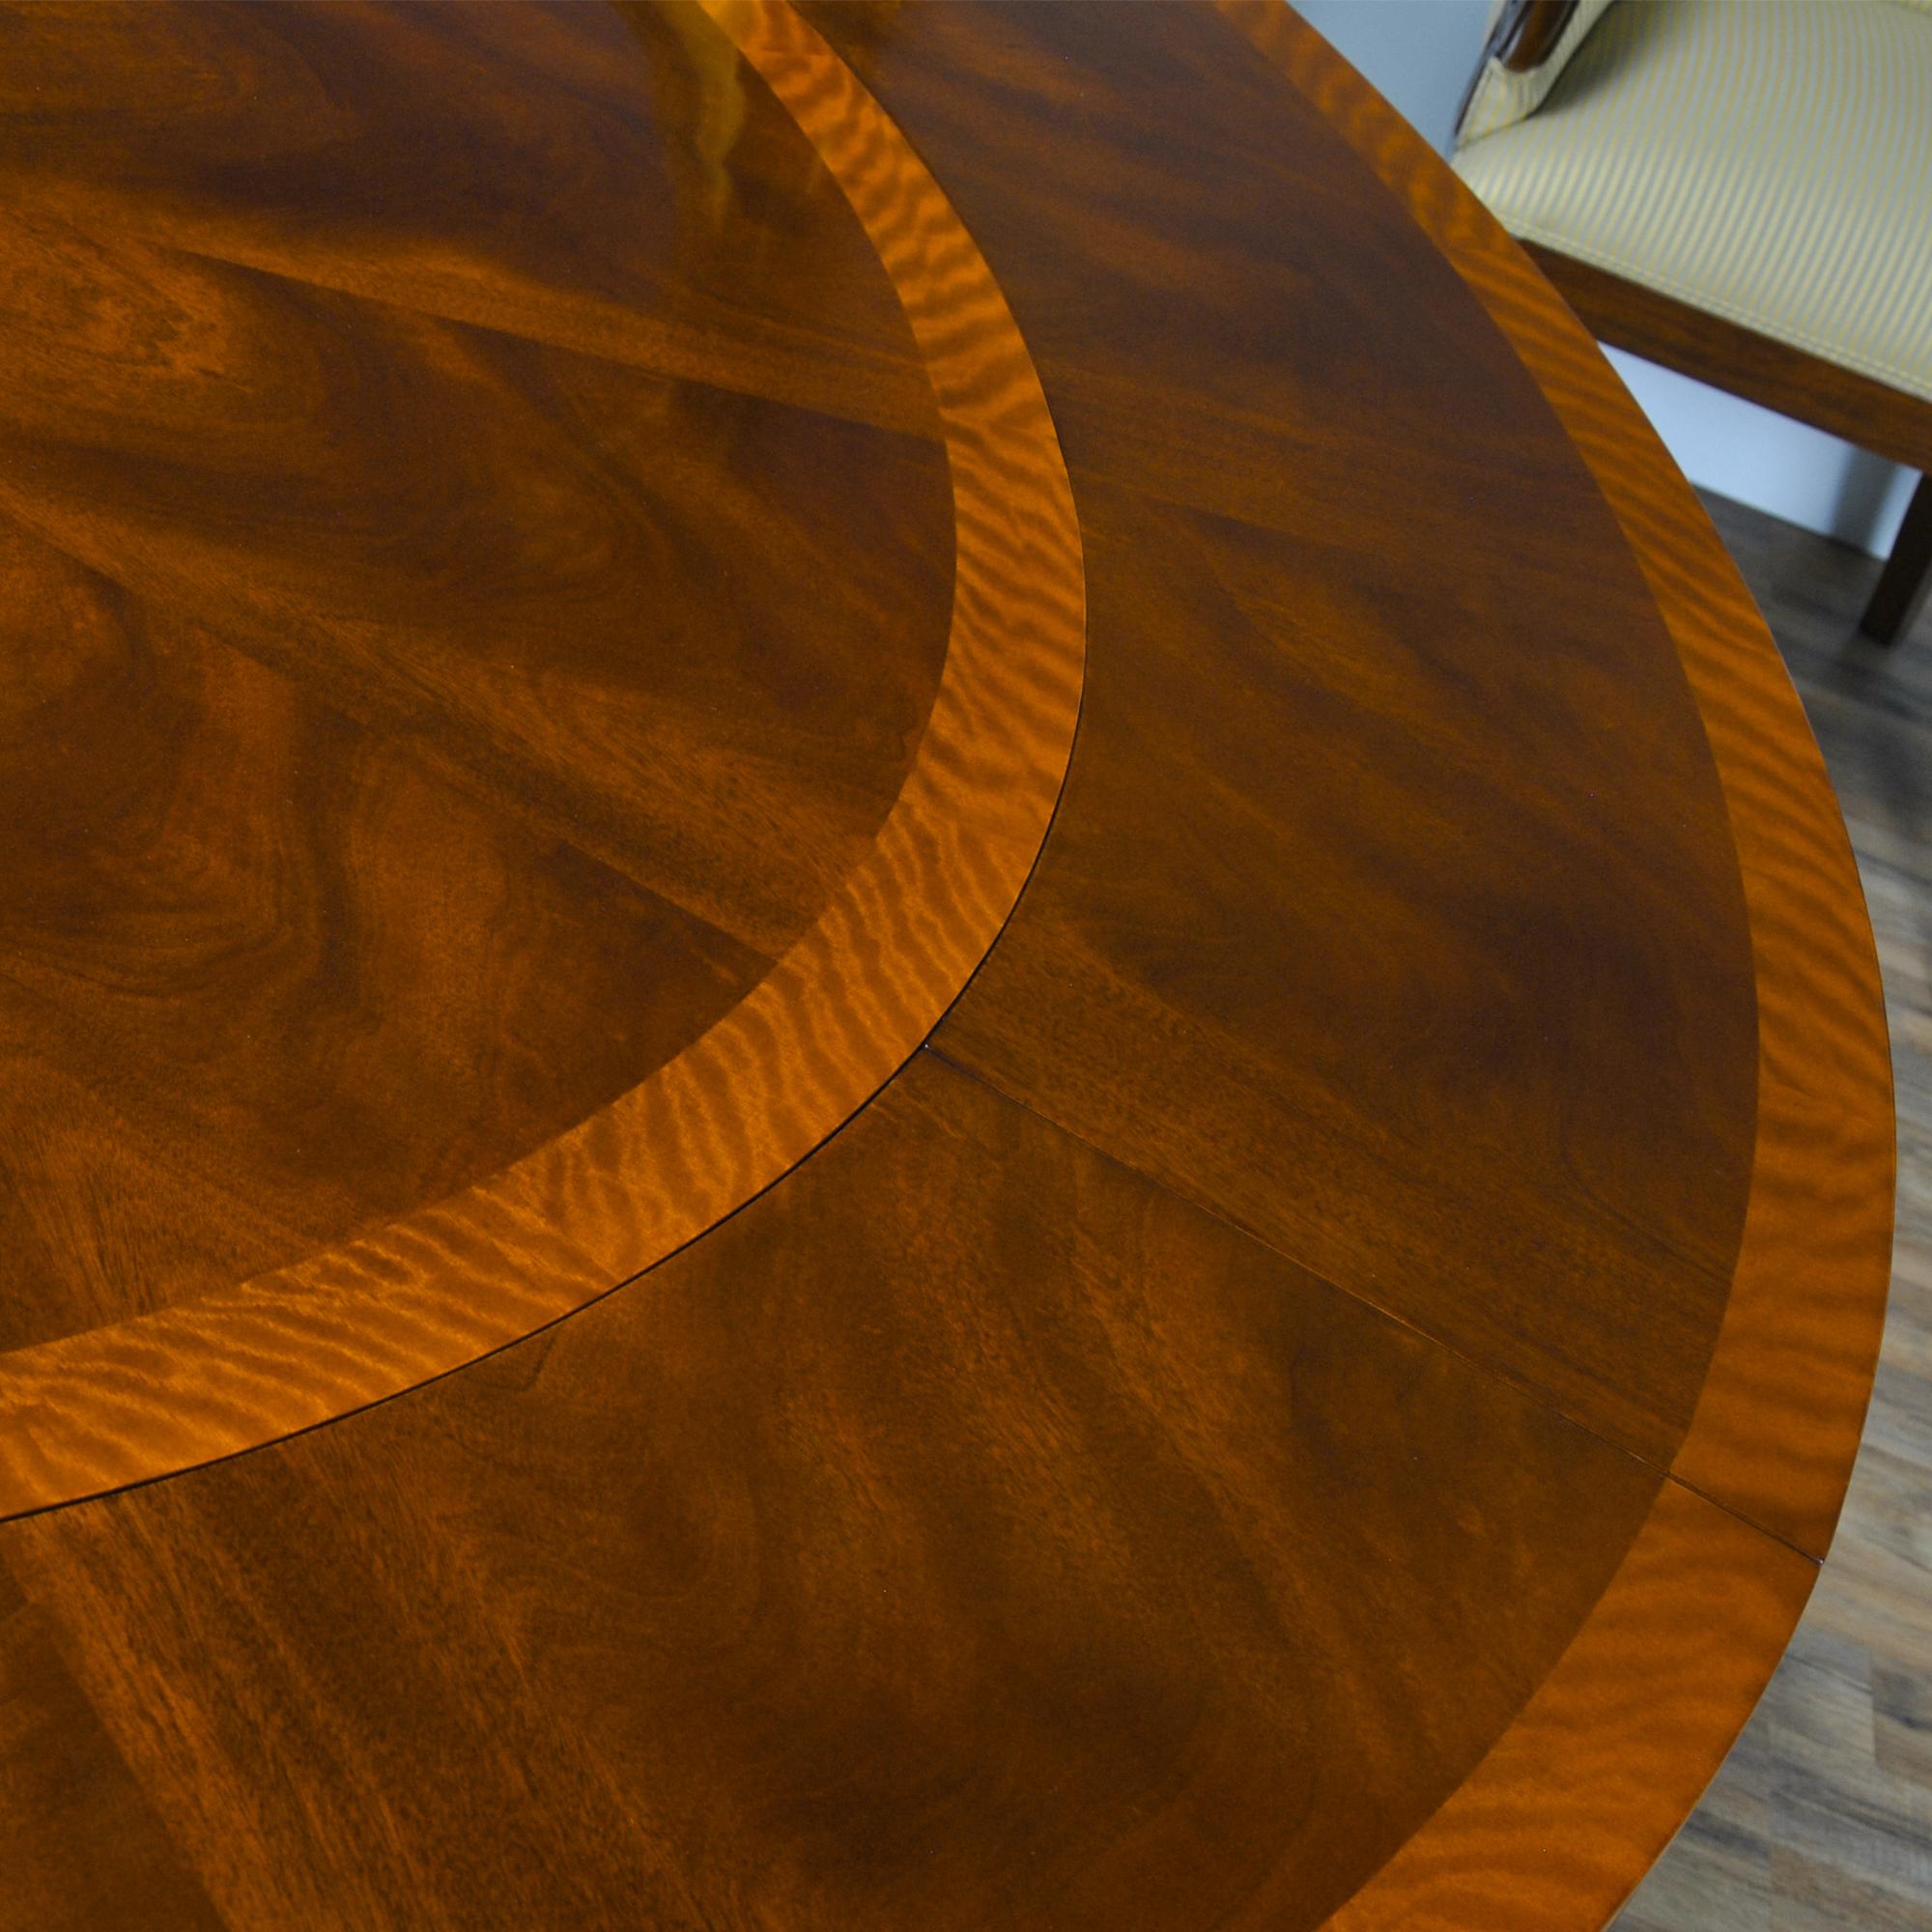 84 round dining table